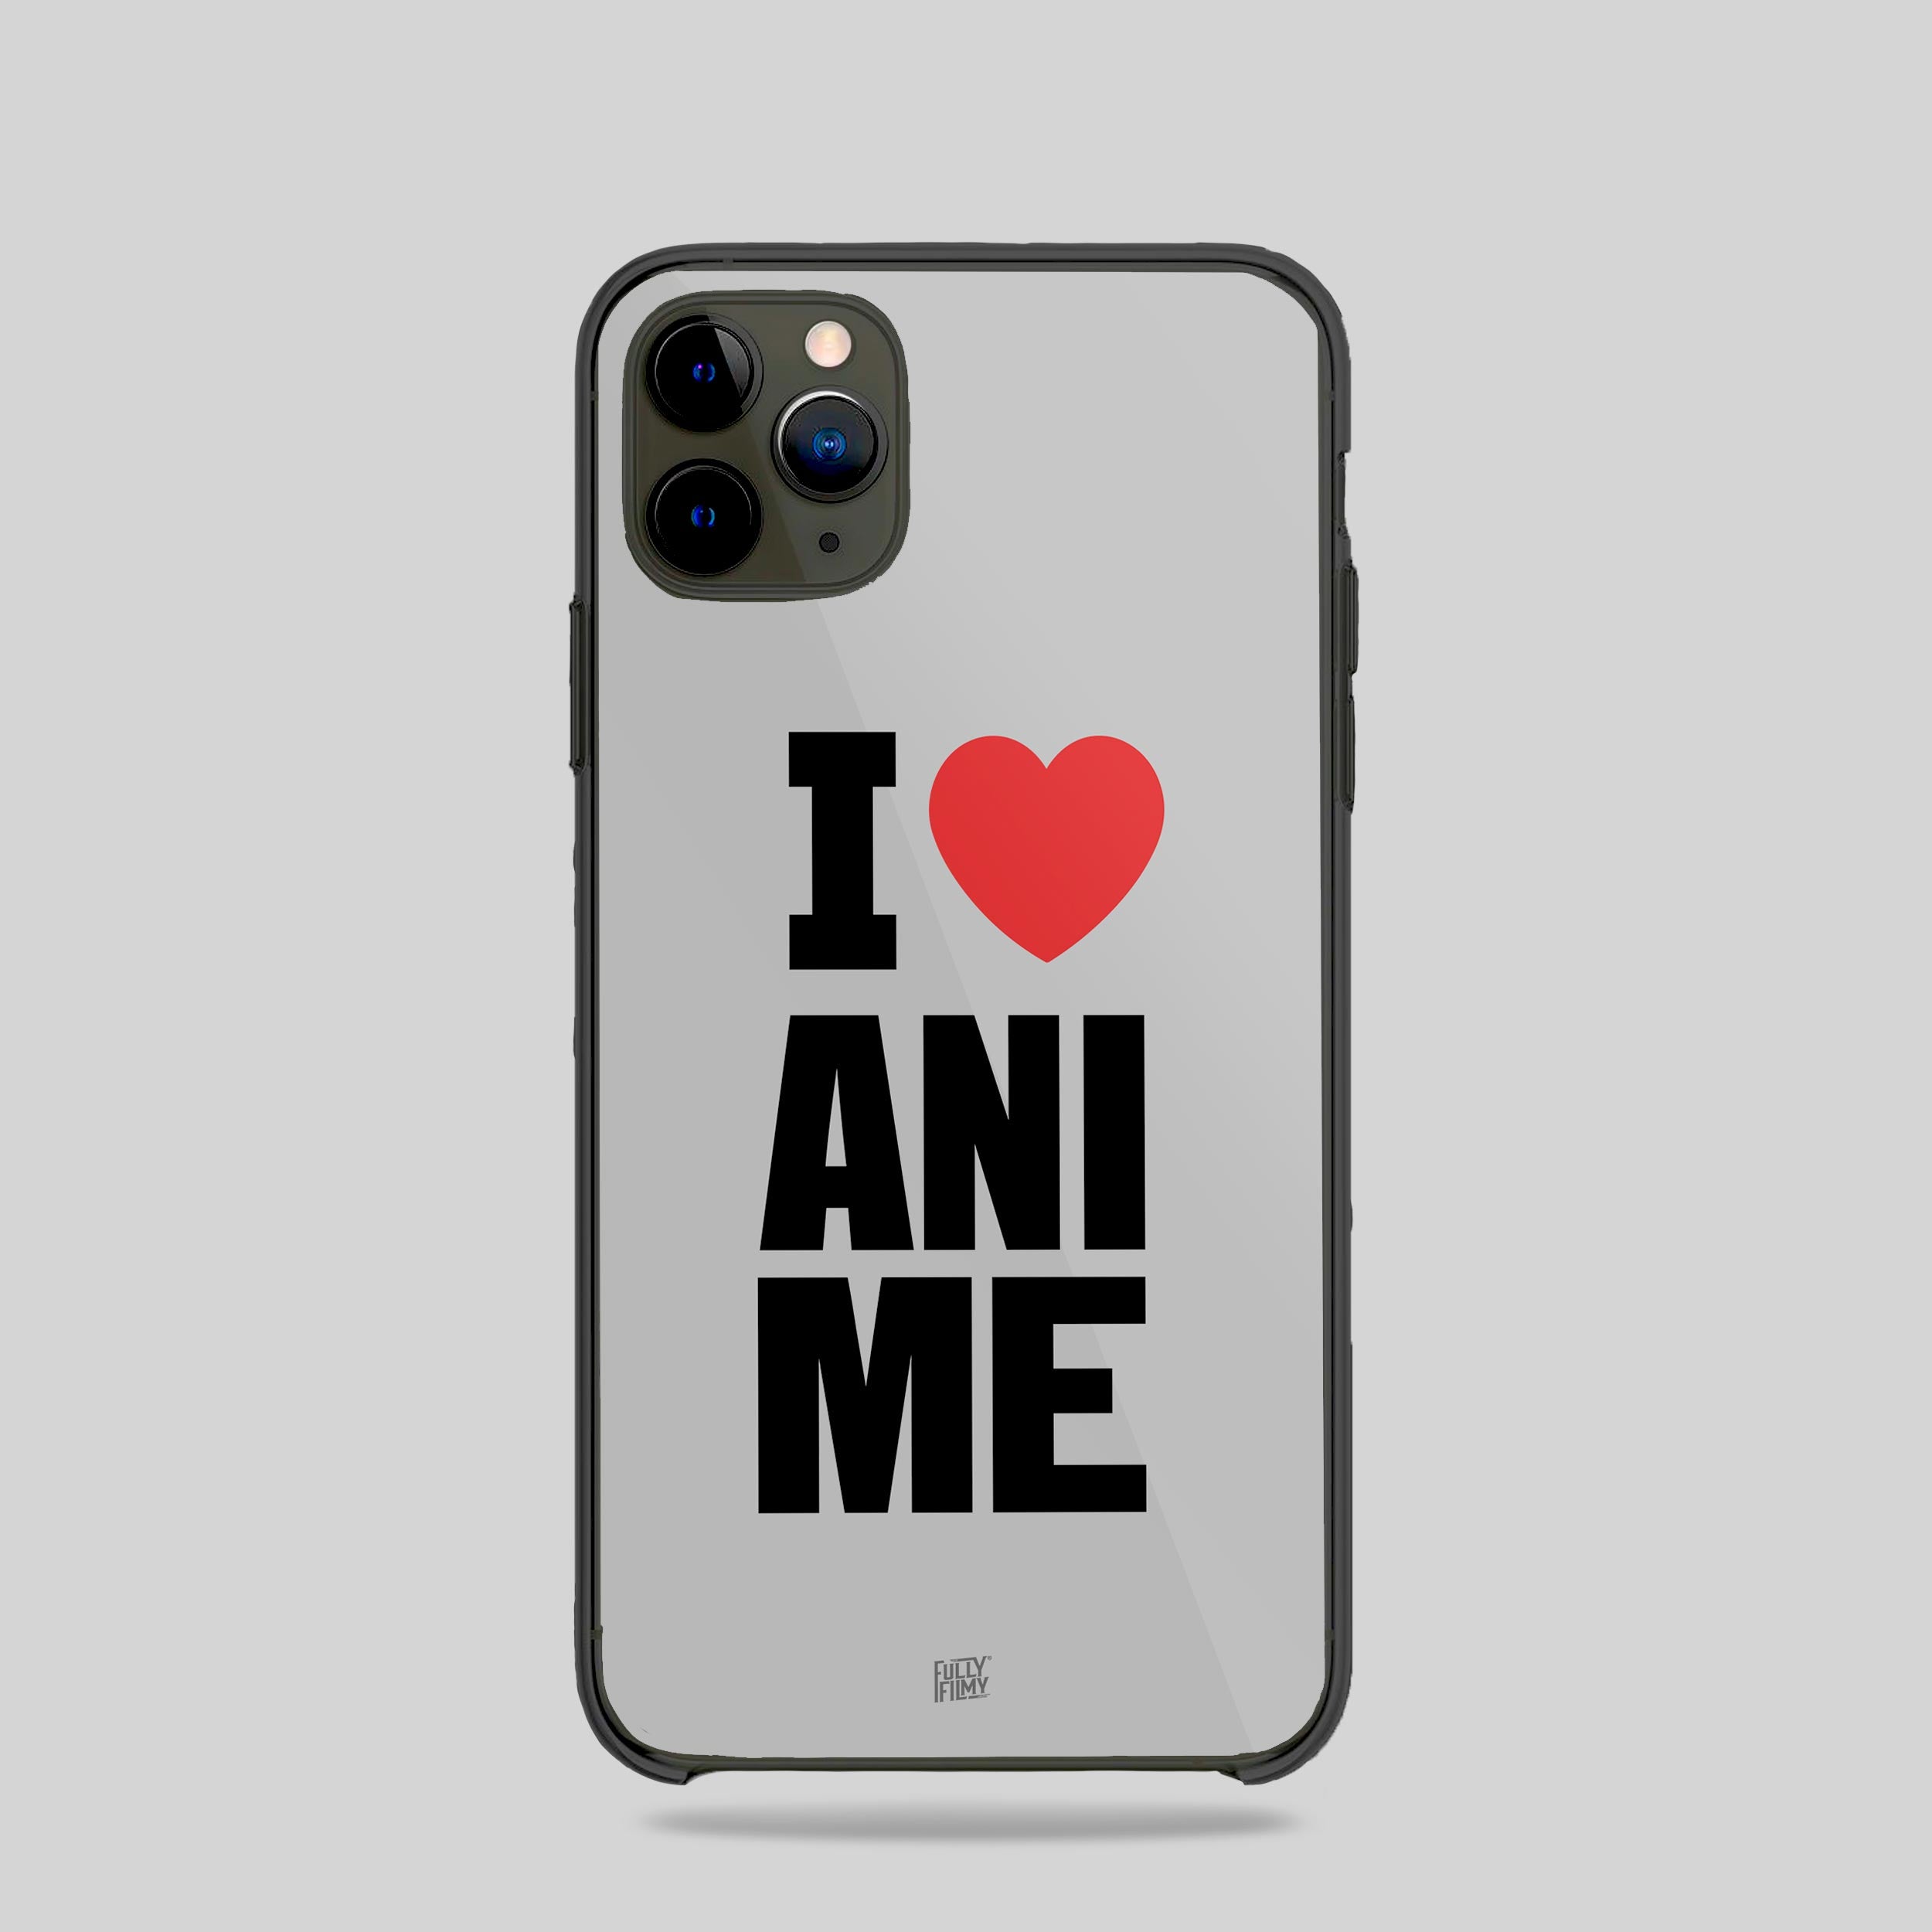 Buy Savage Anime Printed Soft Silicone Mobile Cover at Rs 149